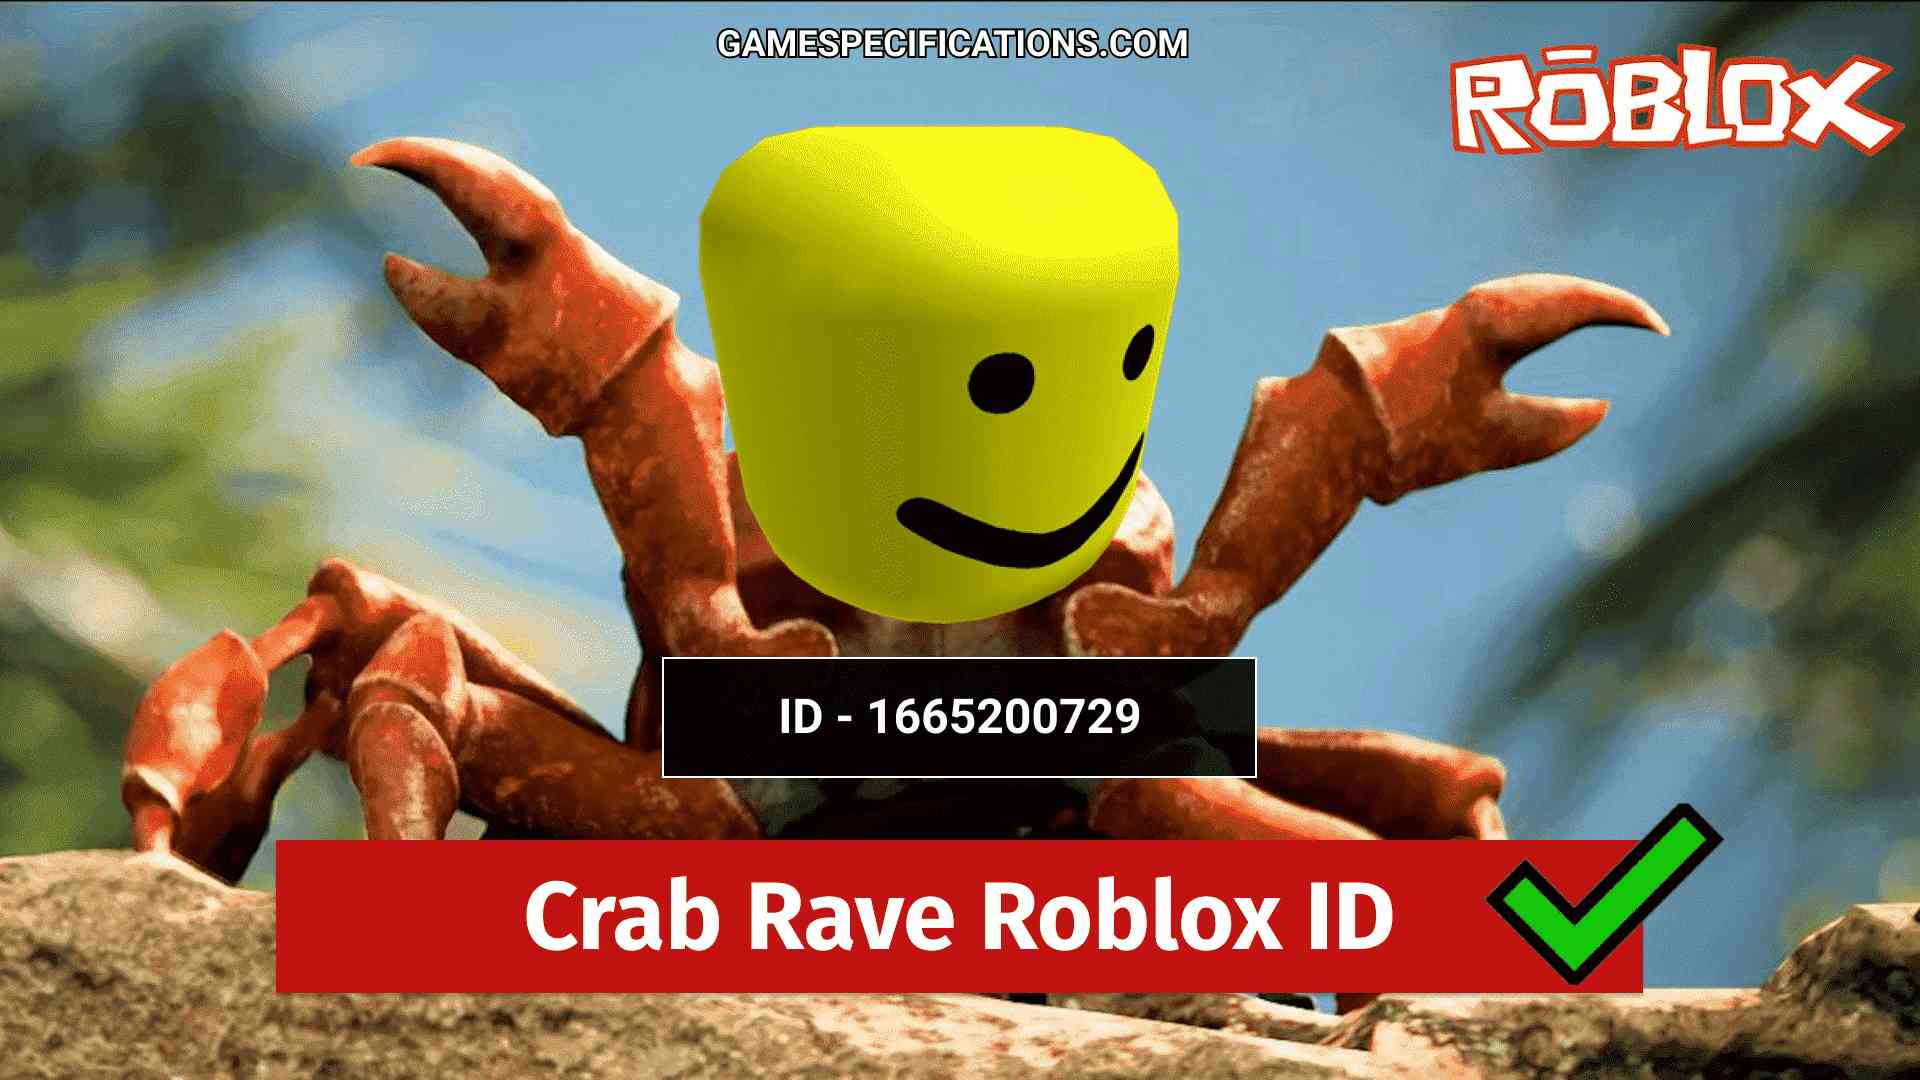 10 Best Crab Rave Roblox Id Codes Parody Remix Included Game Specifications - bakemonogatari roblox id oof